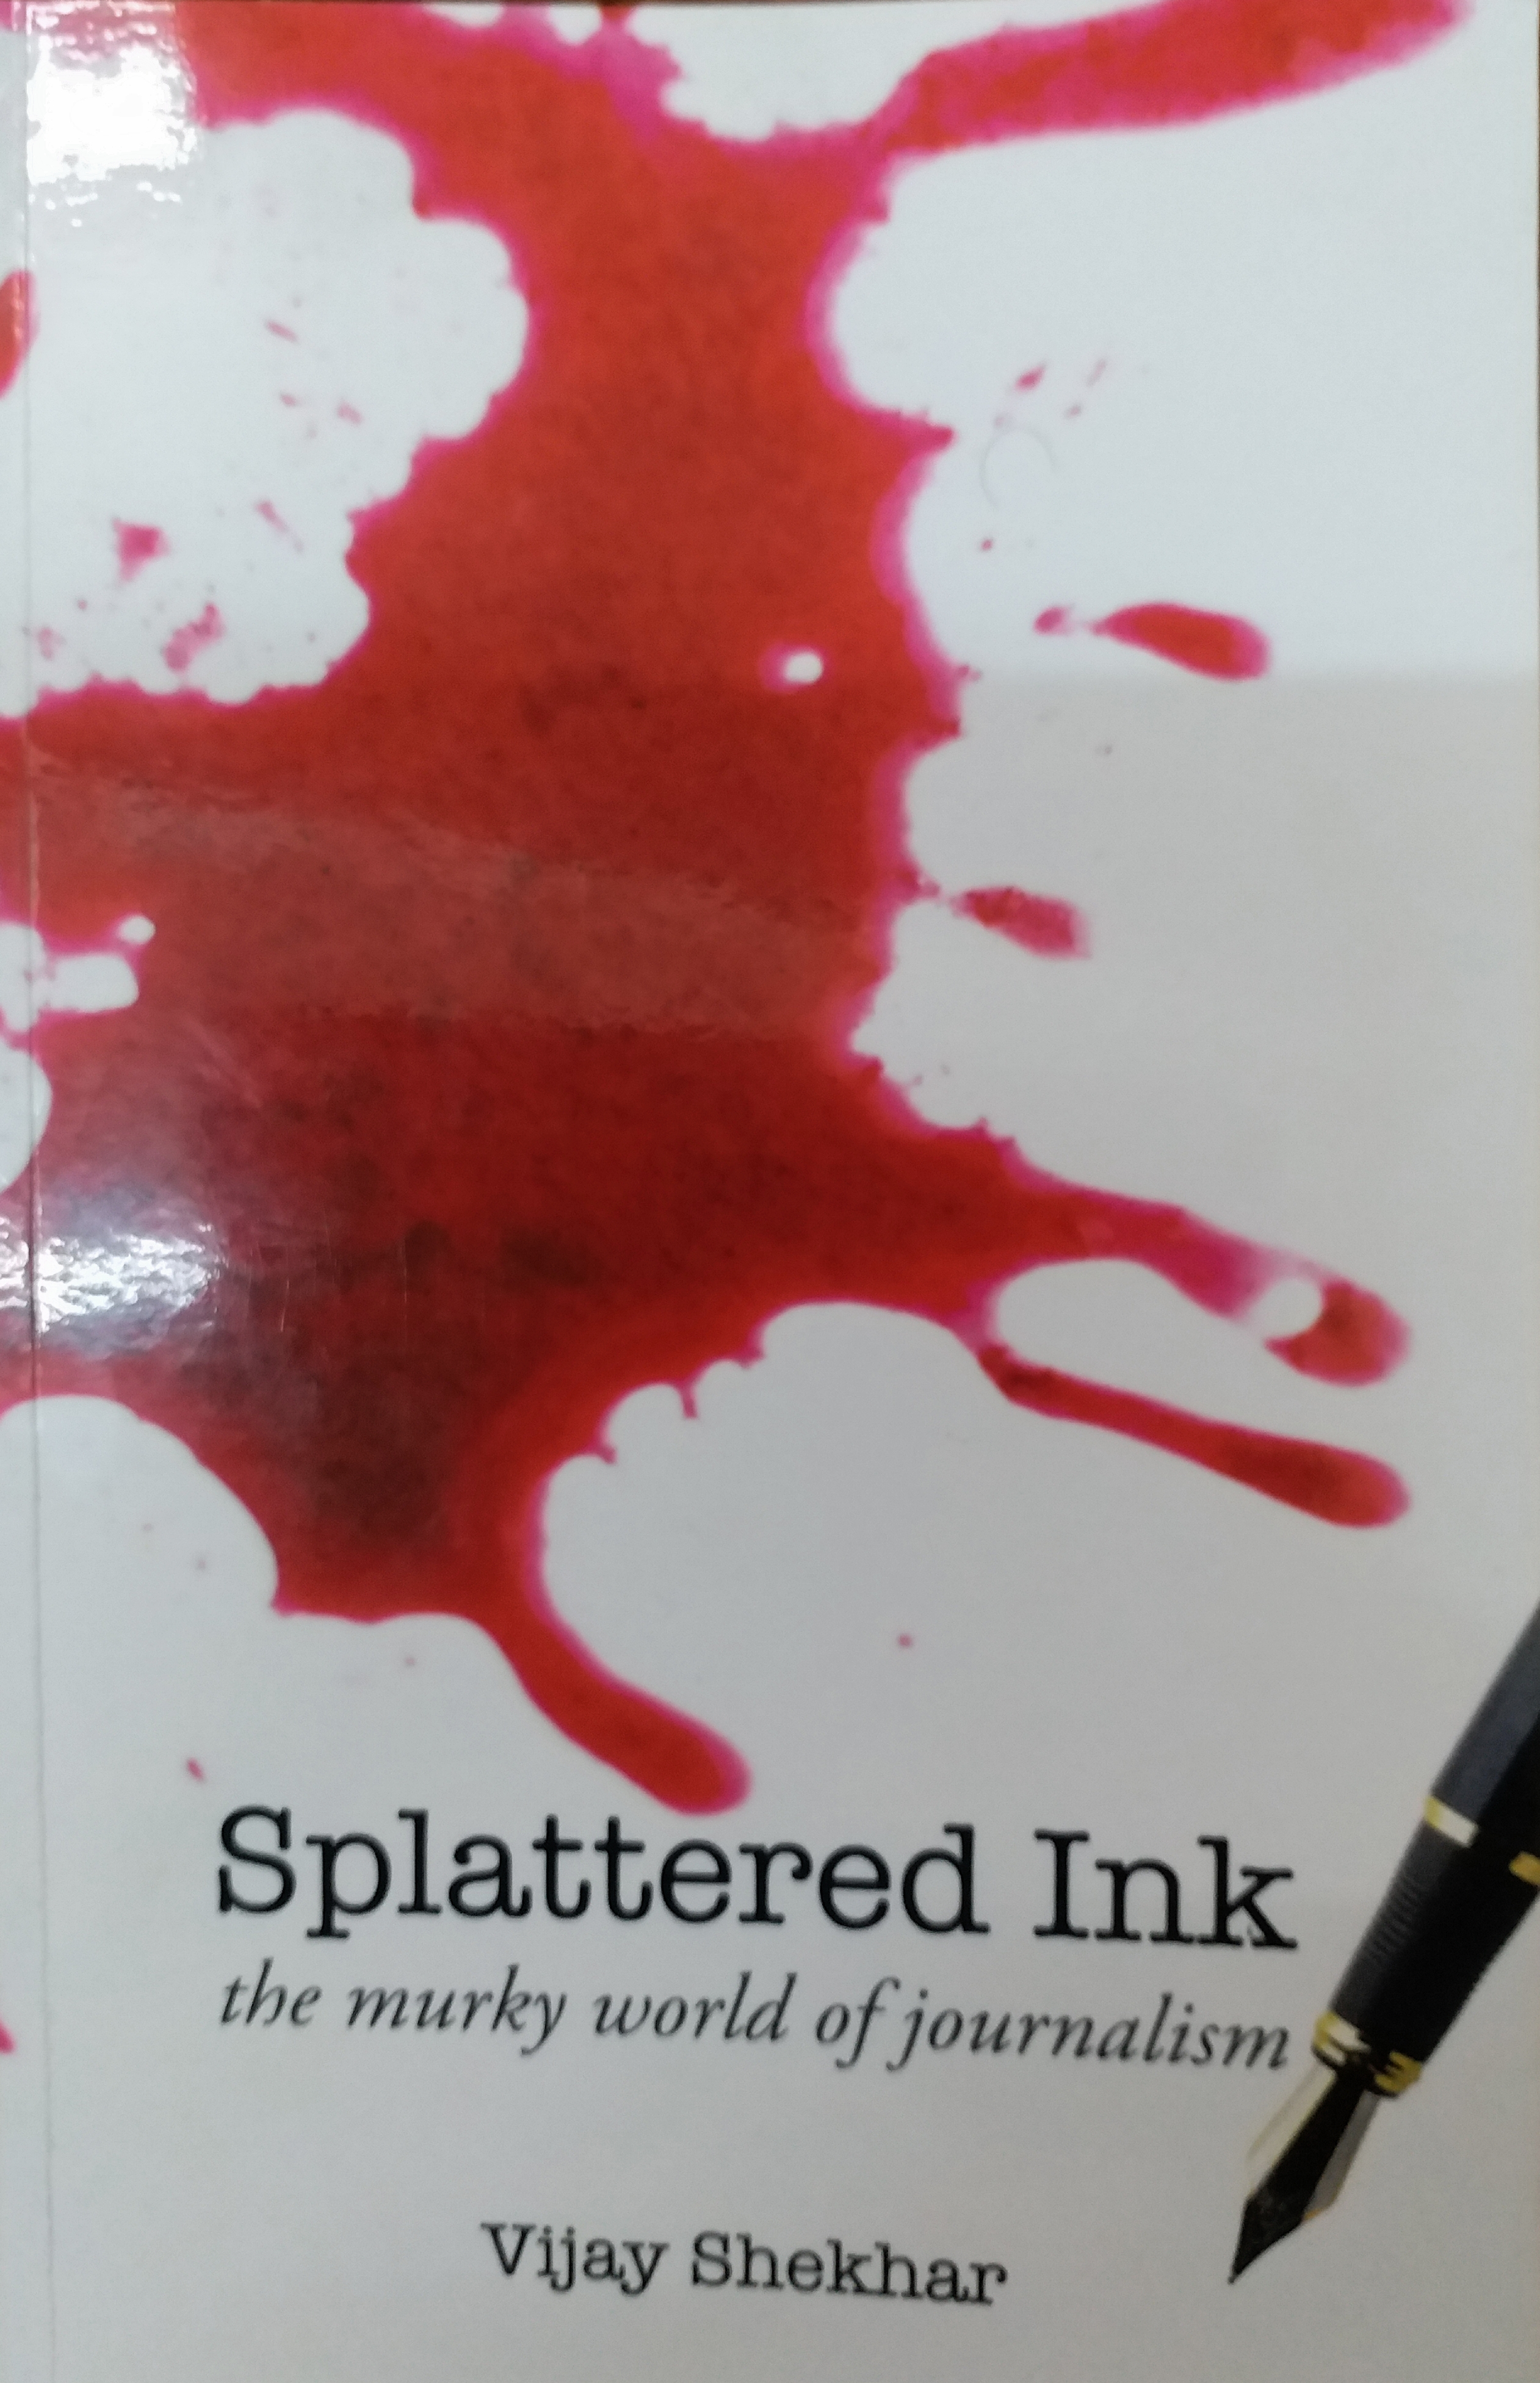 Book Review:   Splattered Ink, the murky world of journalism